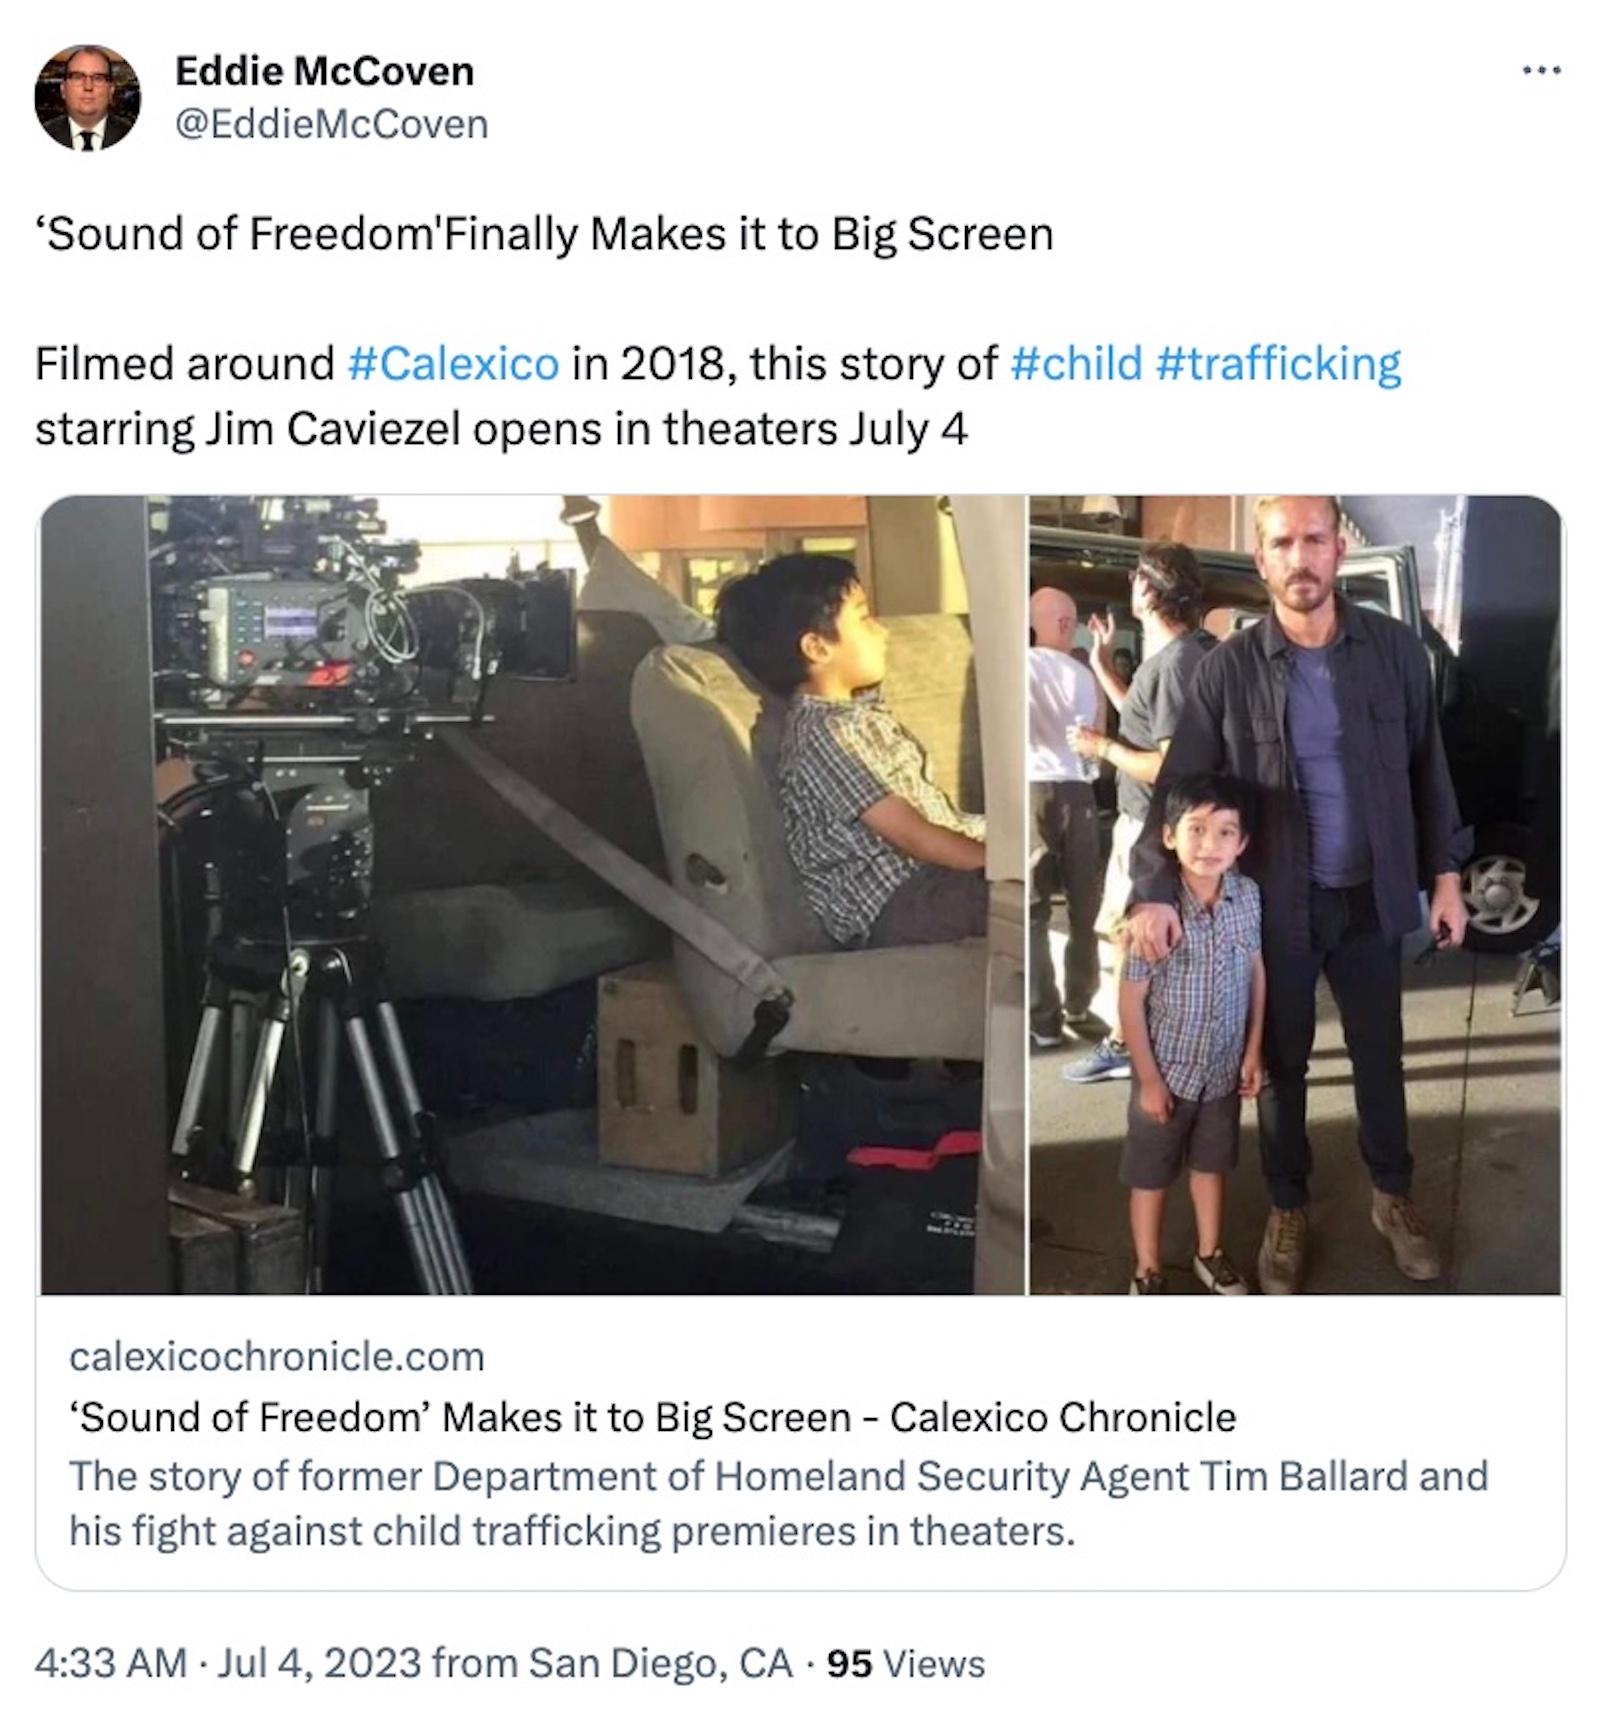 Tweet about Sound of Freedom filming in California